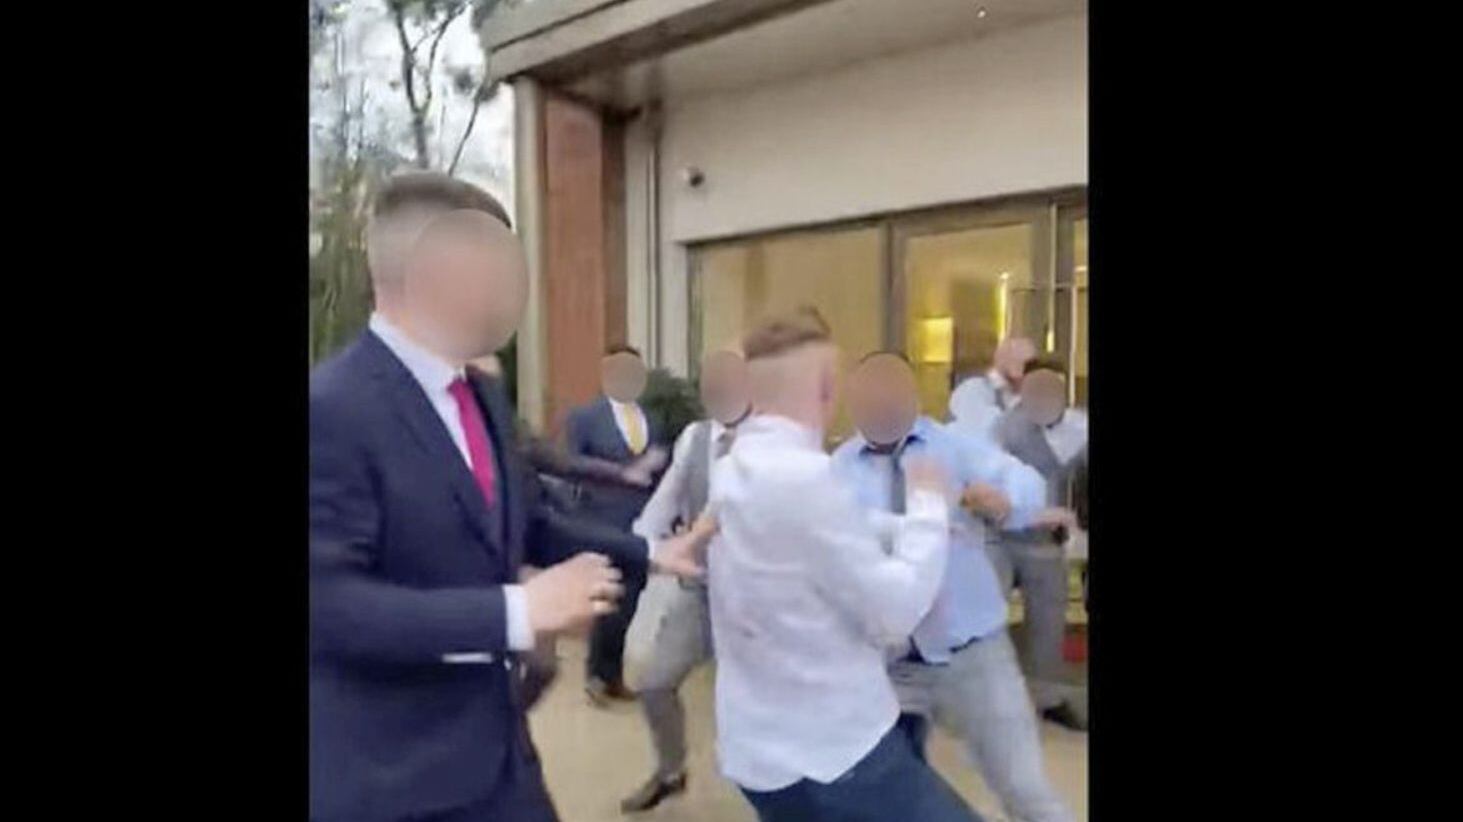 Footage shared last month shows fighting breaking out at a charity MMA event at a south Belfast hotel. 